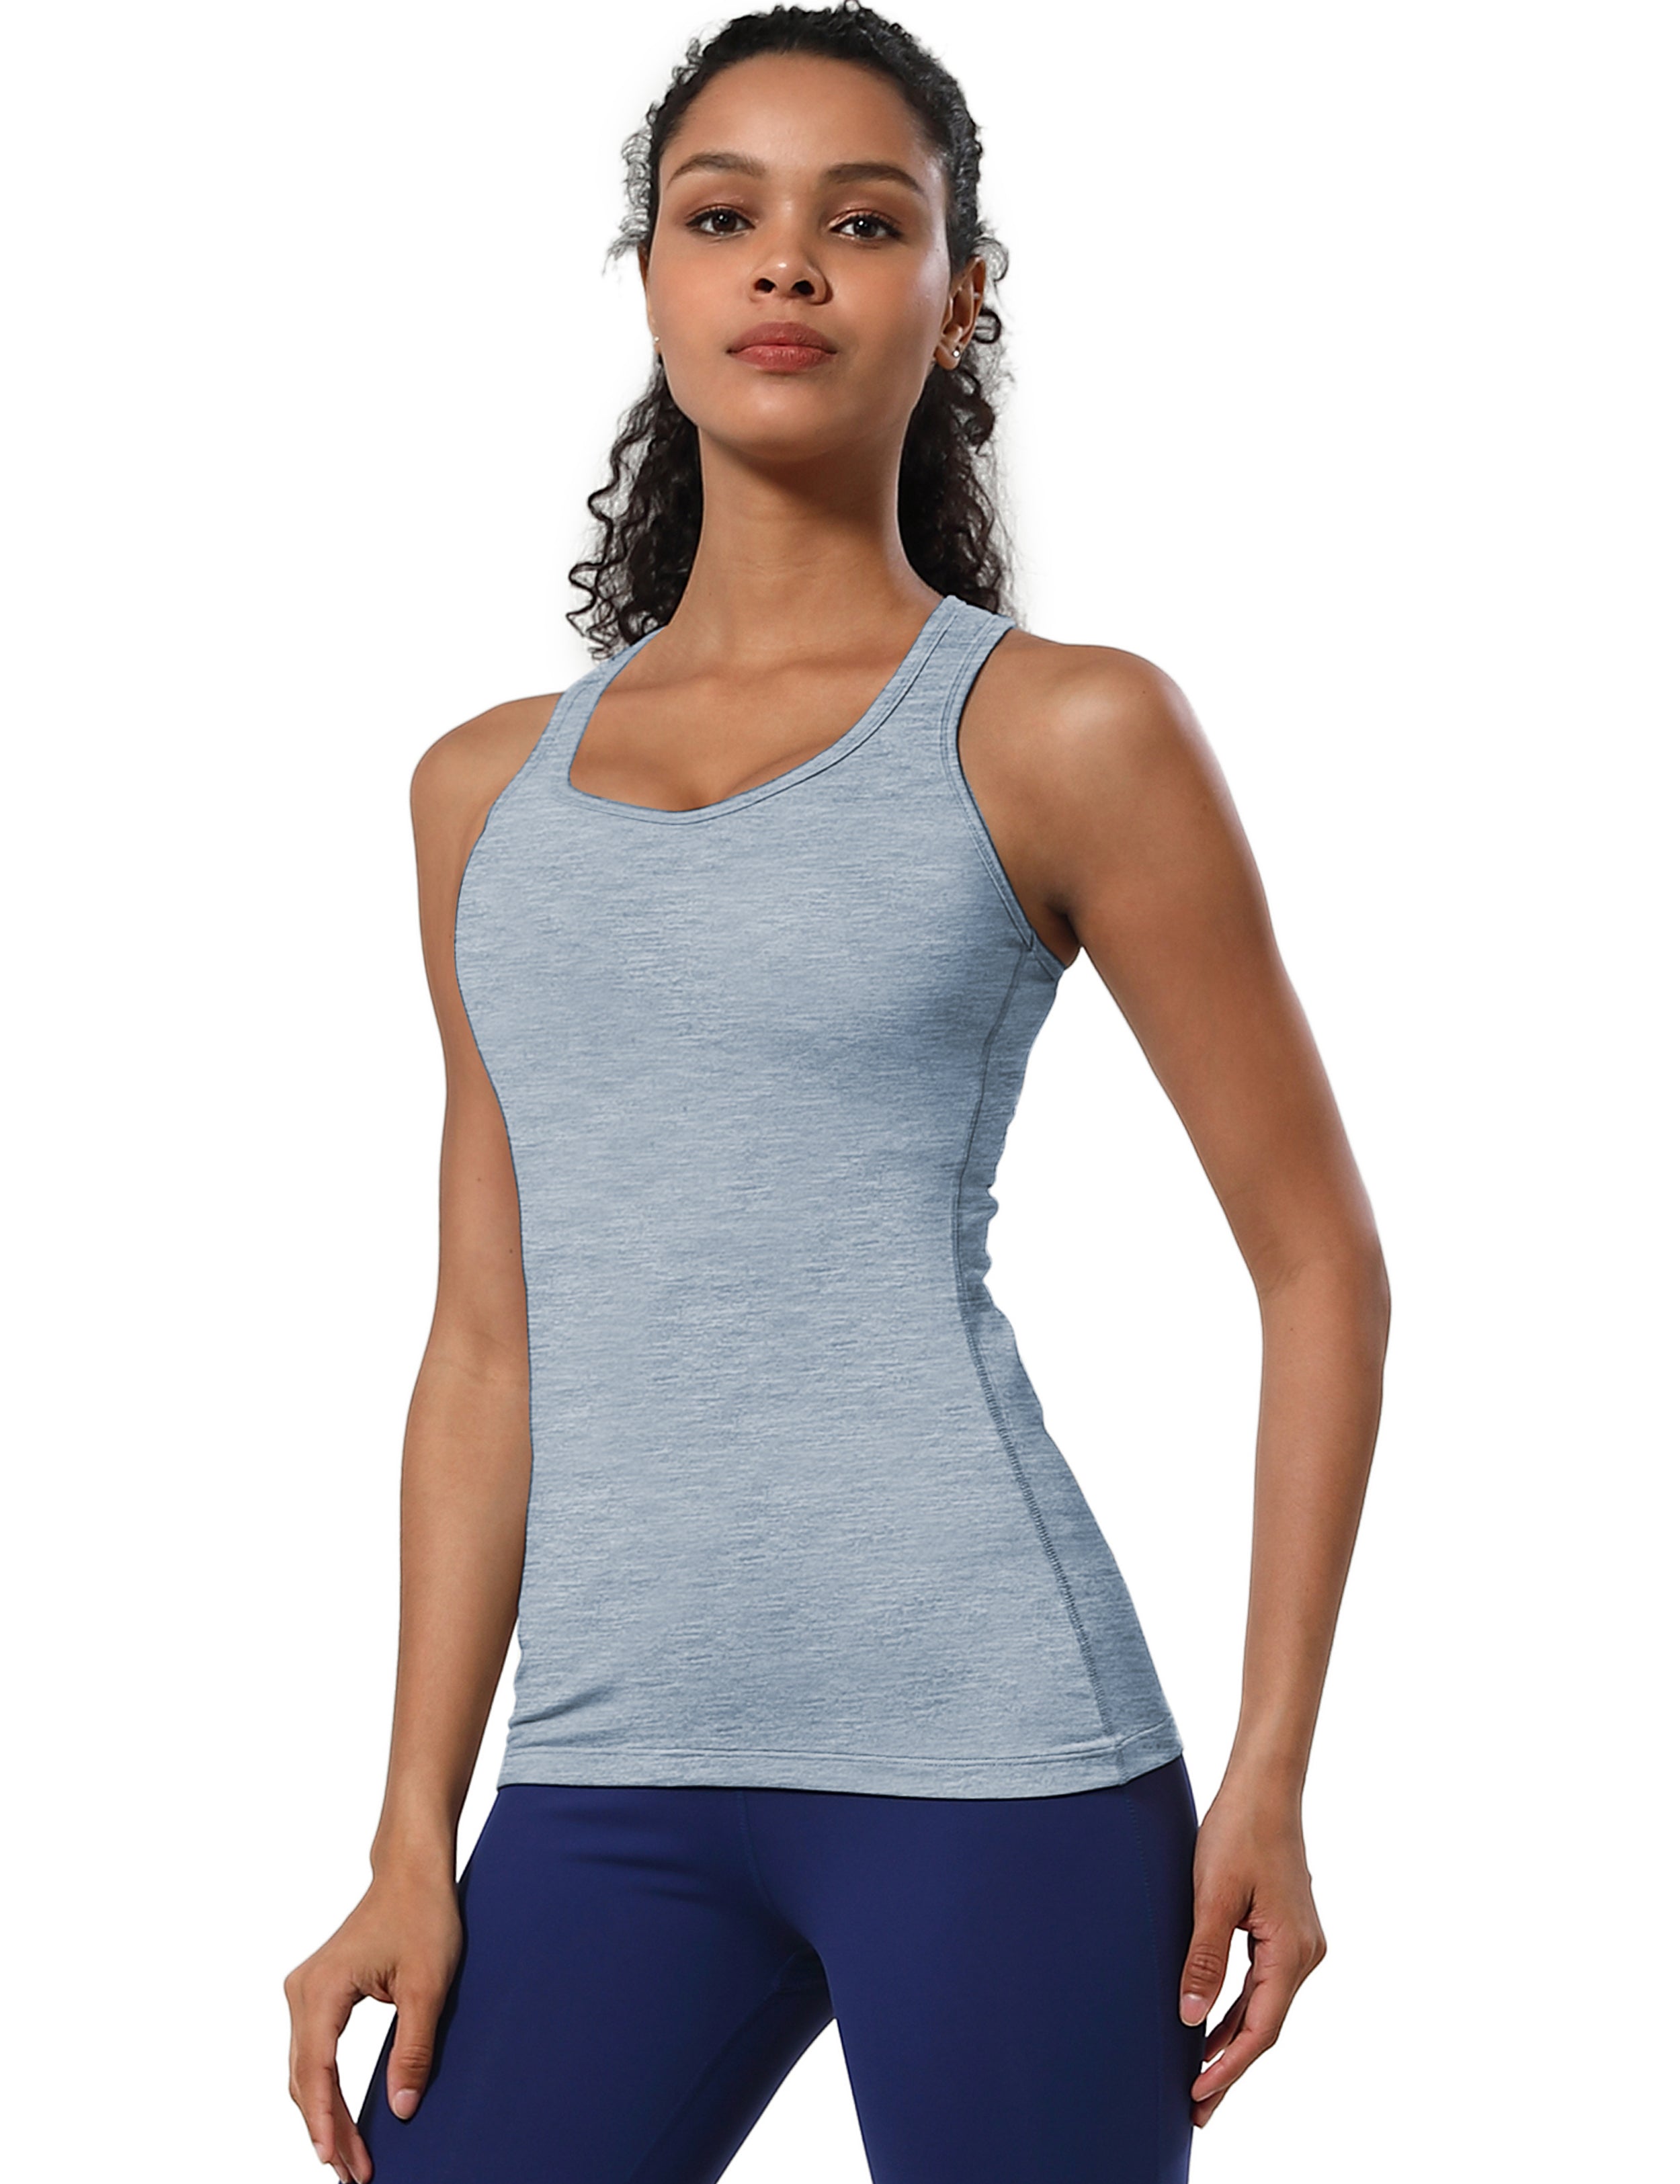 Racerback Athletic Tank Tops heatherblue 92%Nylon/8%Spandex(Cotton Soft) Designed for Pilates Tight Fit So buttery soft, it feels weightless Sweat-wicking Four-way stretch Breathable Contours your body Sits below the waistband for moderate, everyday coverage